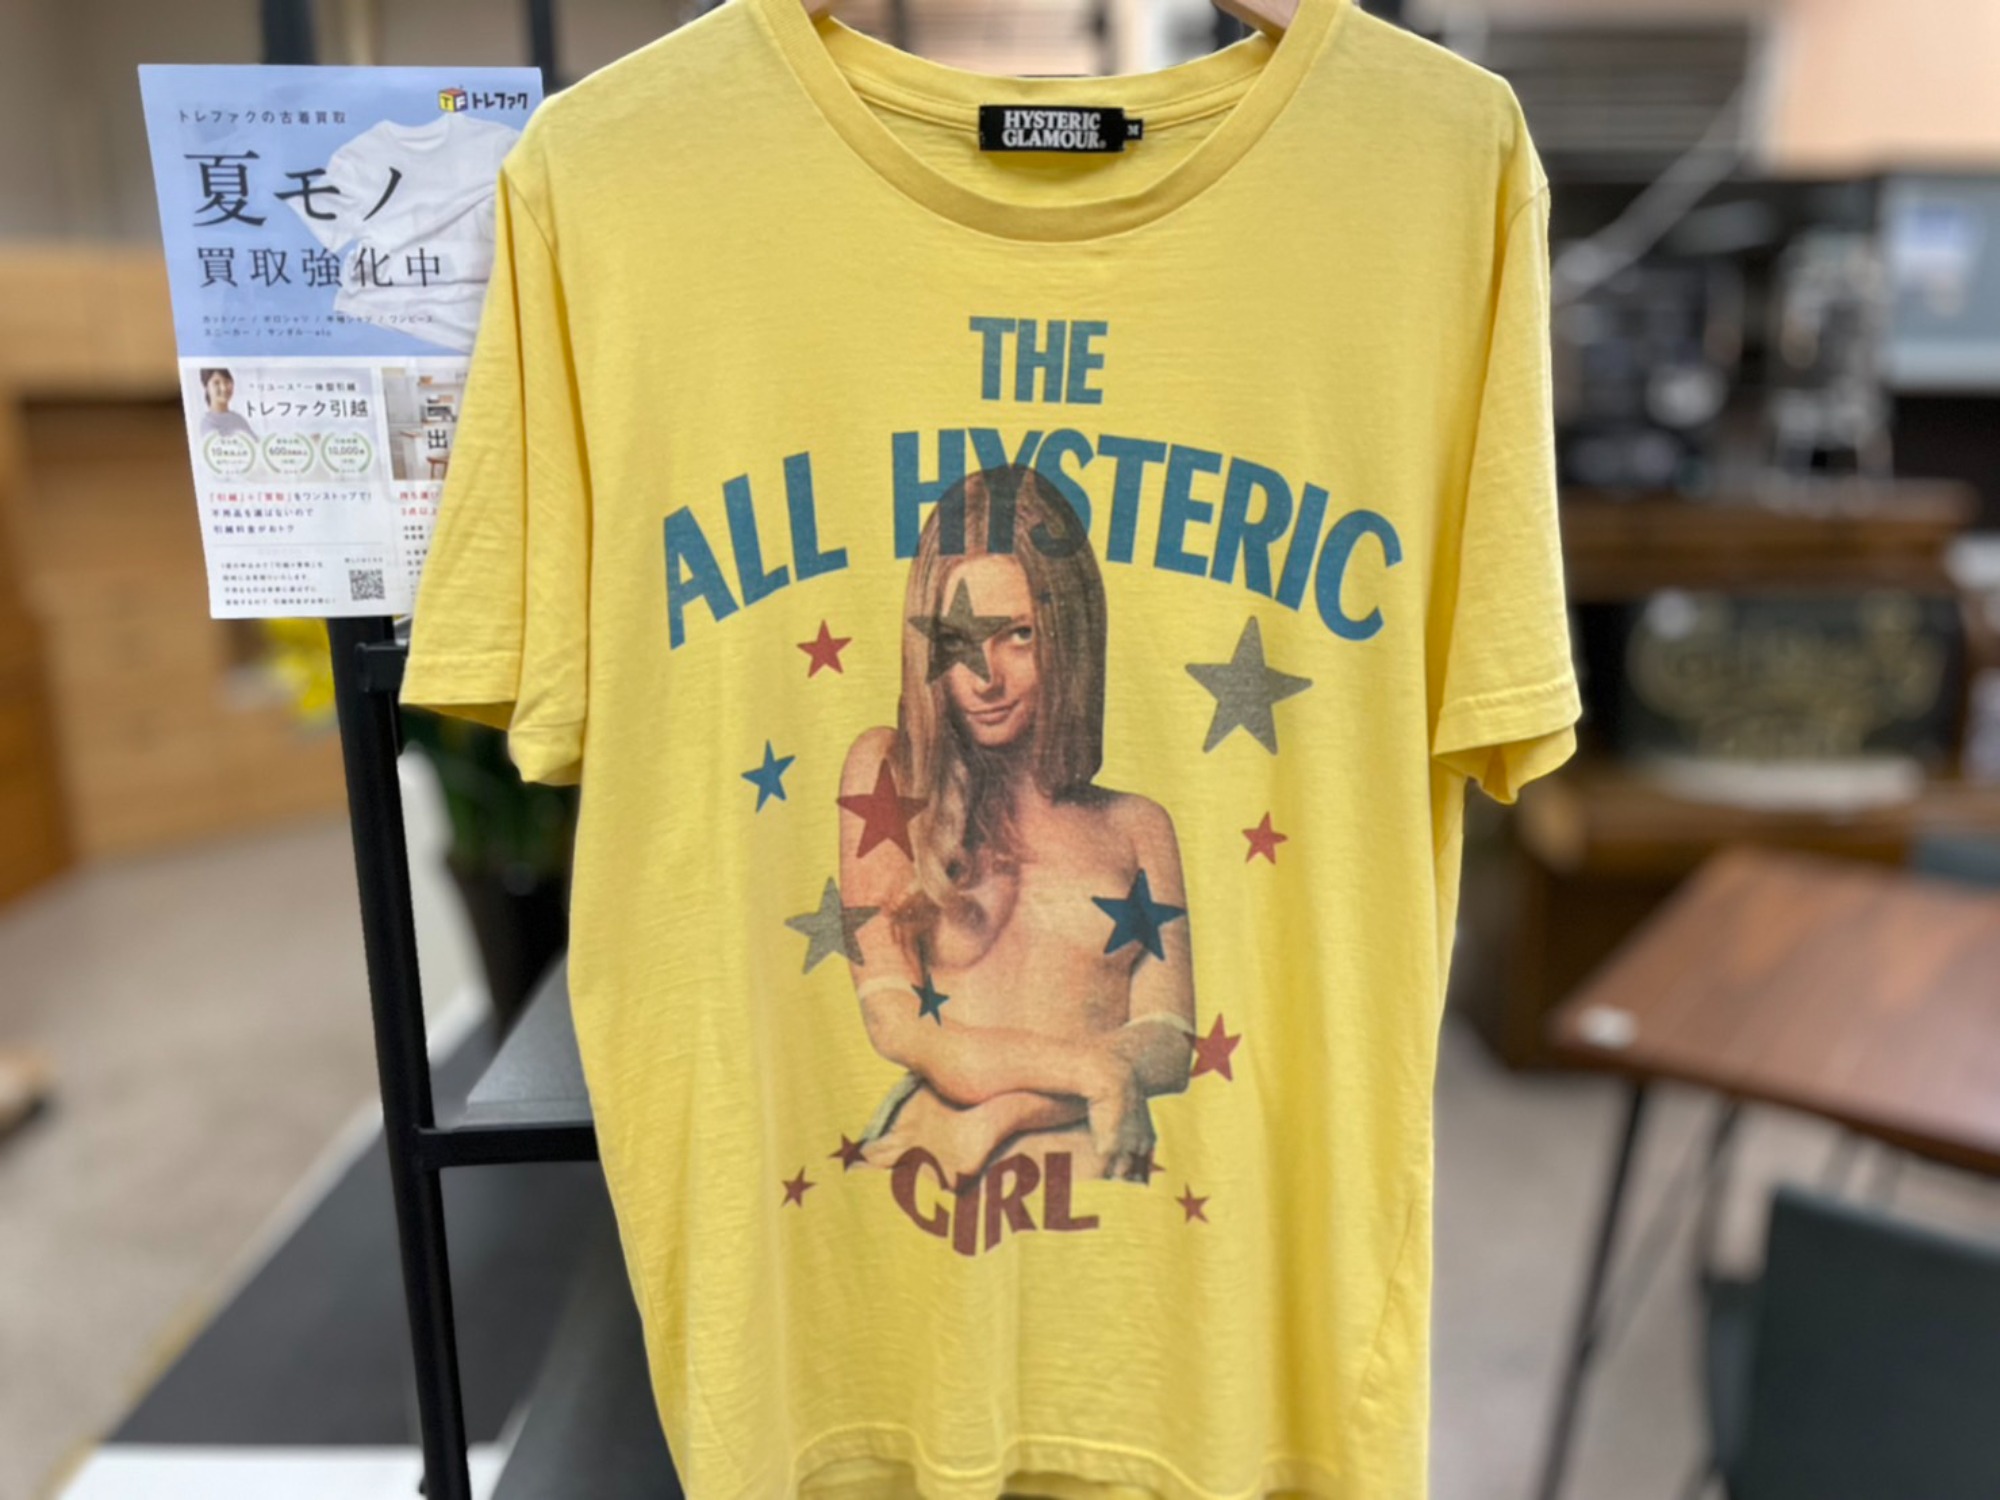 HYSTERIC GLAMOUR Tシャツ